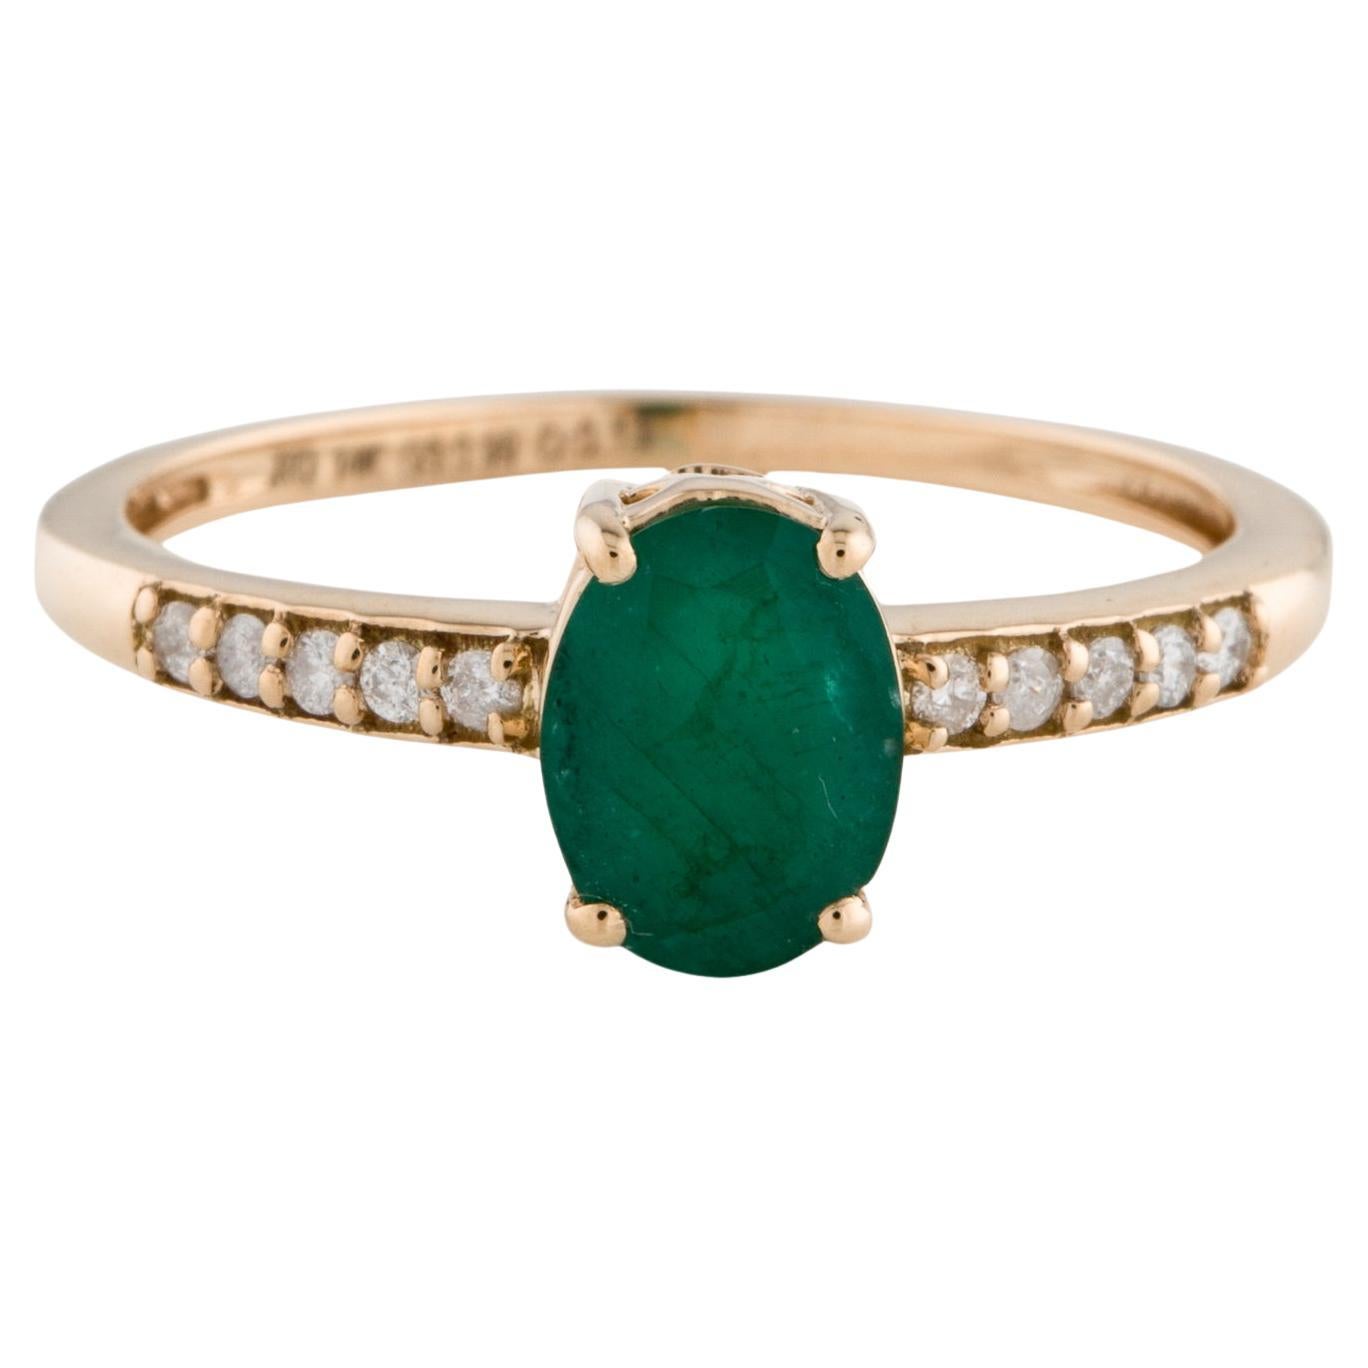 Captivating 14K Gold 1.12ctw Emerald & Diamond Ring - Size 8.75 - Fine Luxury For Sale